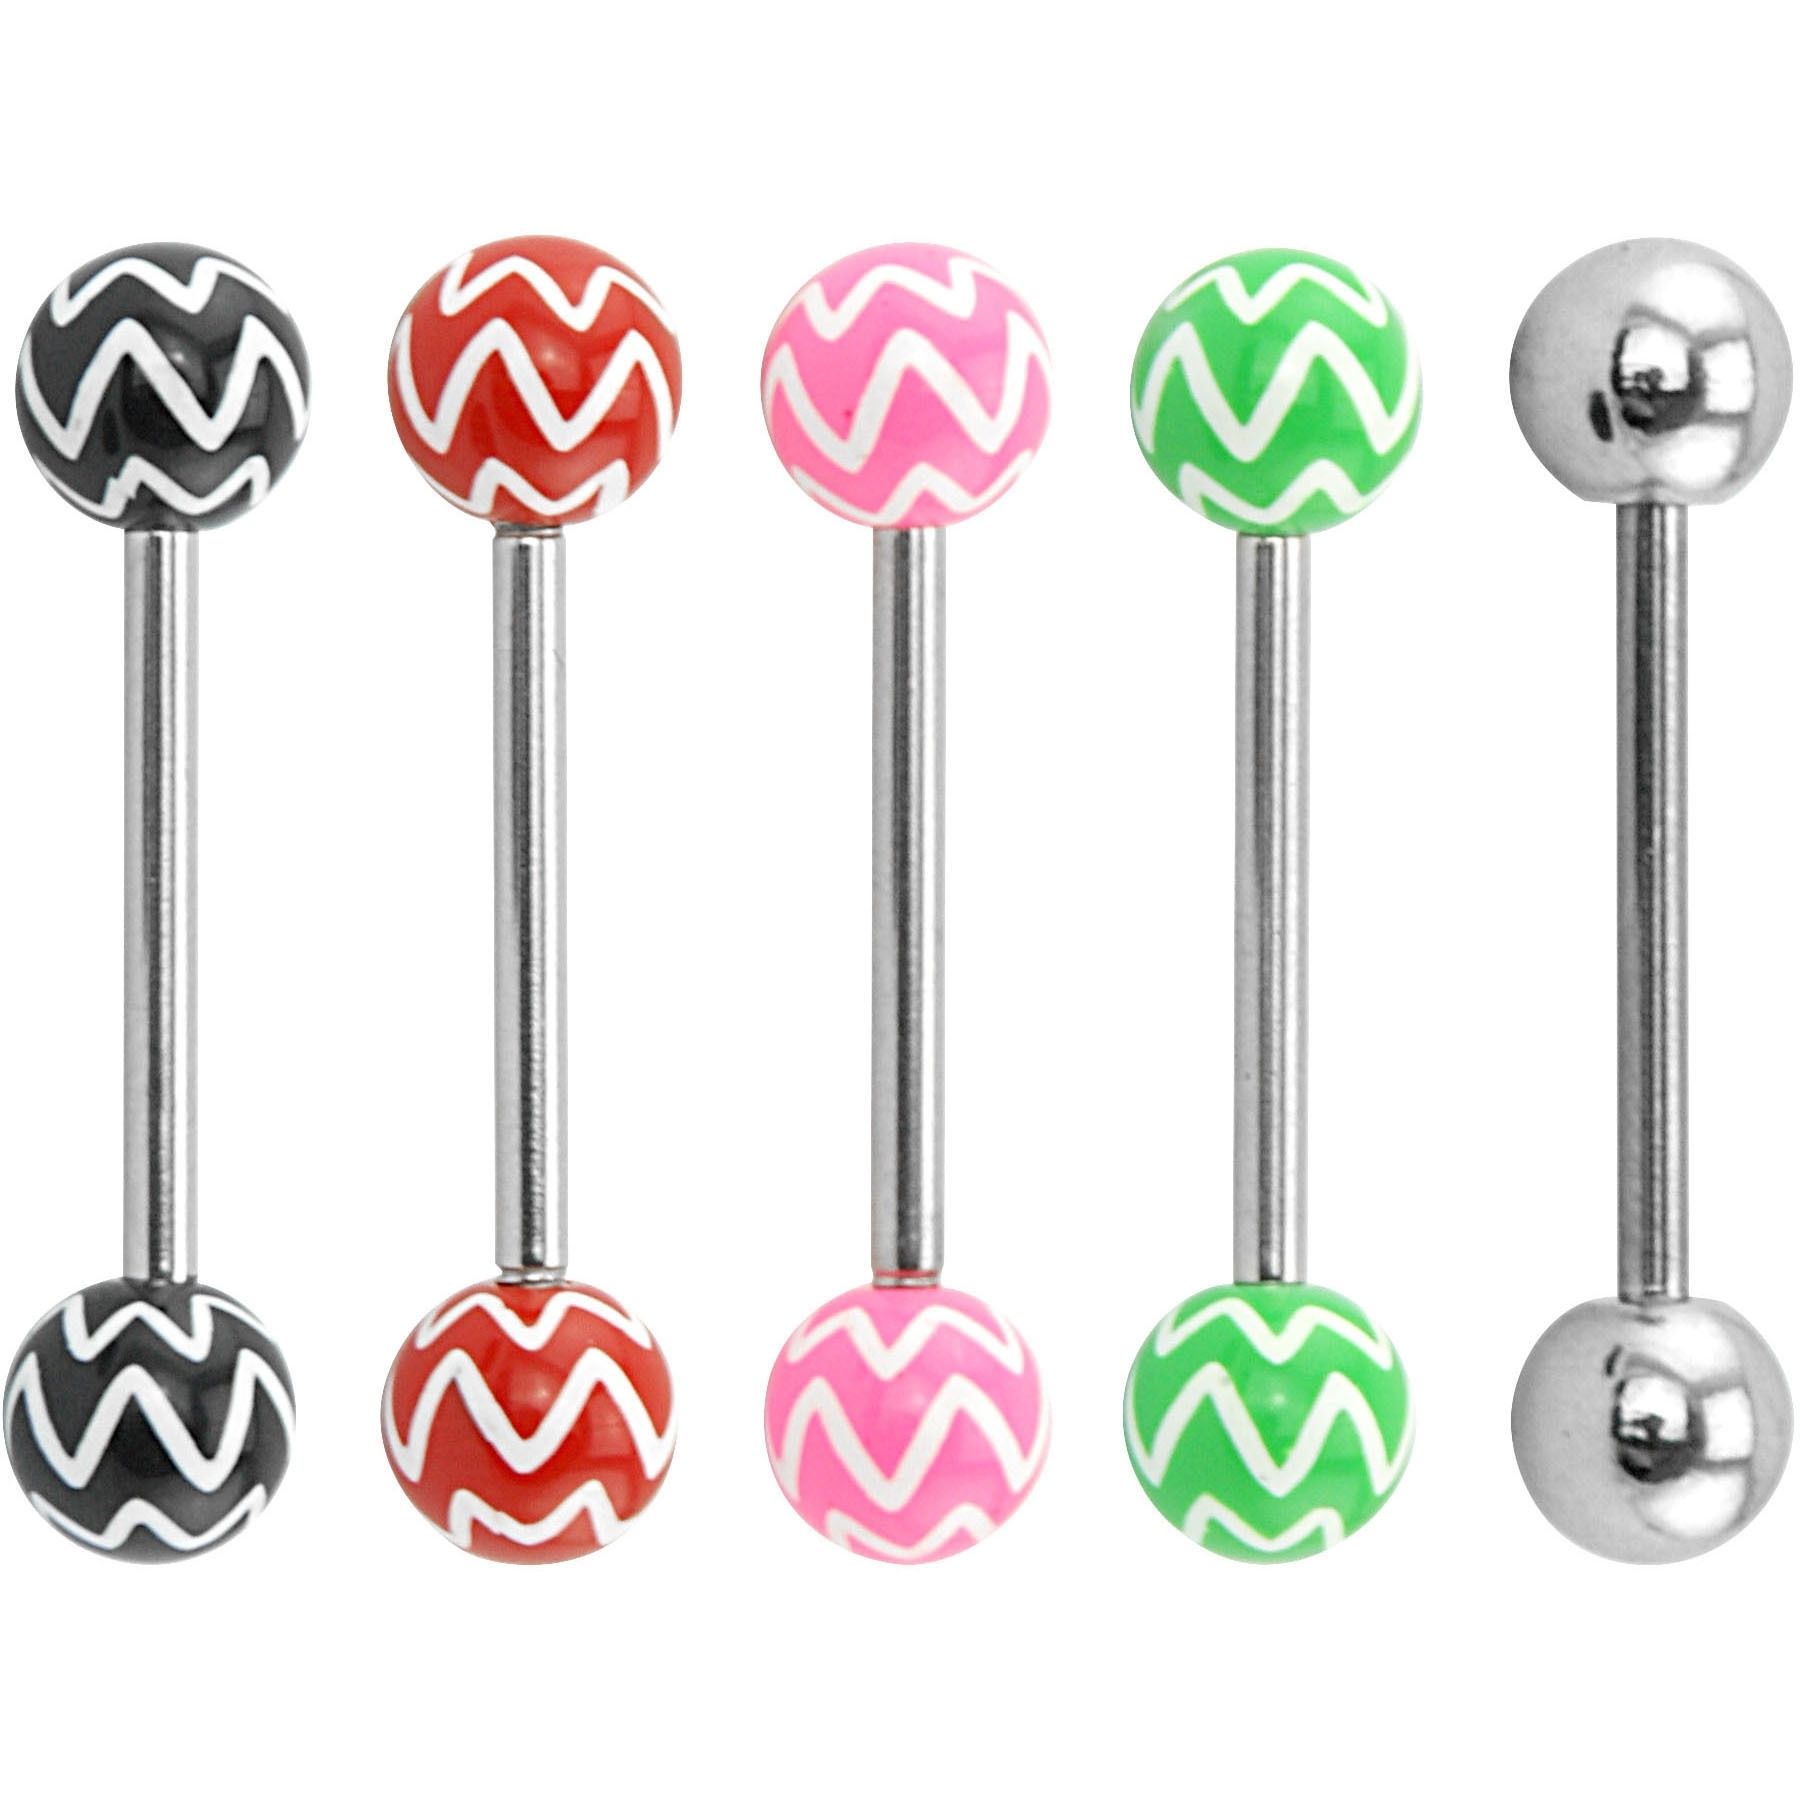 Supreme Jewelry Chevron Tongue Rings Value Pack (set Of 5) – Free Intended For Most Popular Chevron Tongue Rings (View 5 of 15)